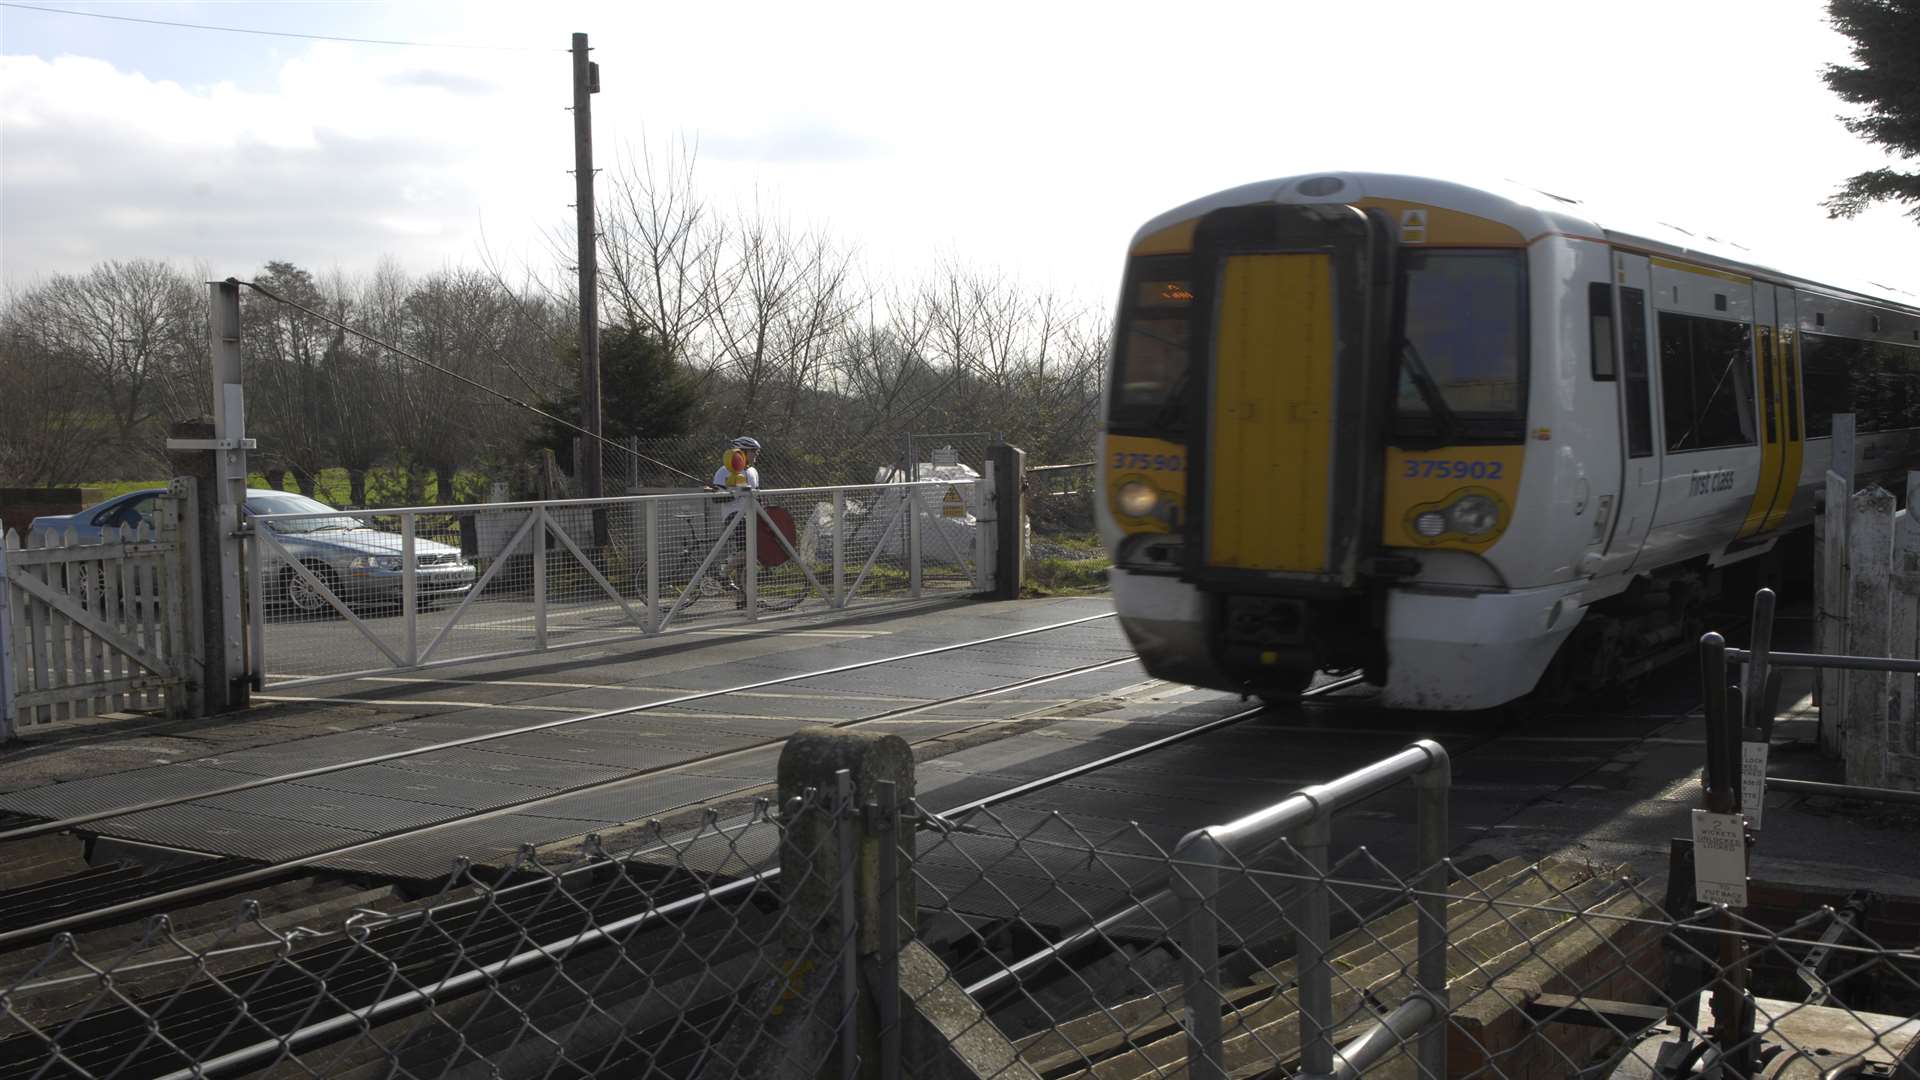 The teenage joyrider was forced to stop at the level crossing